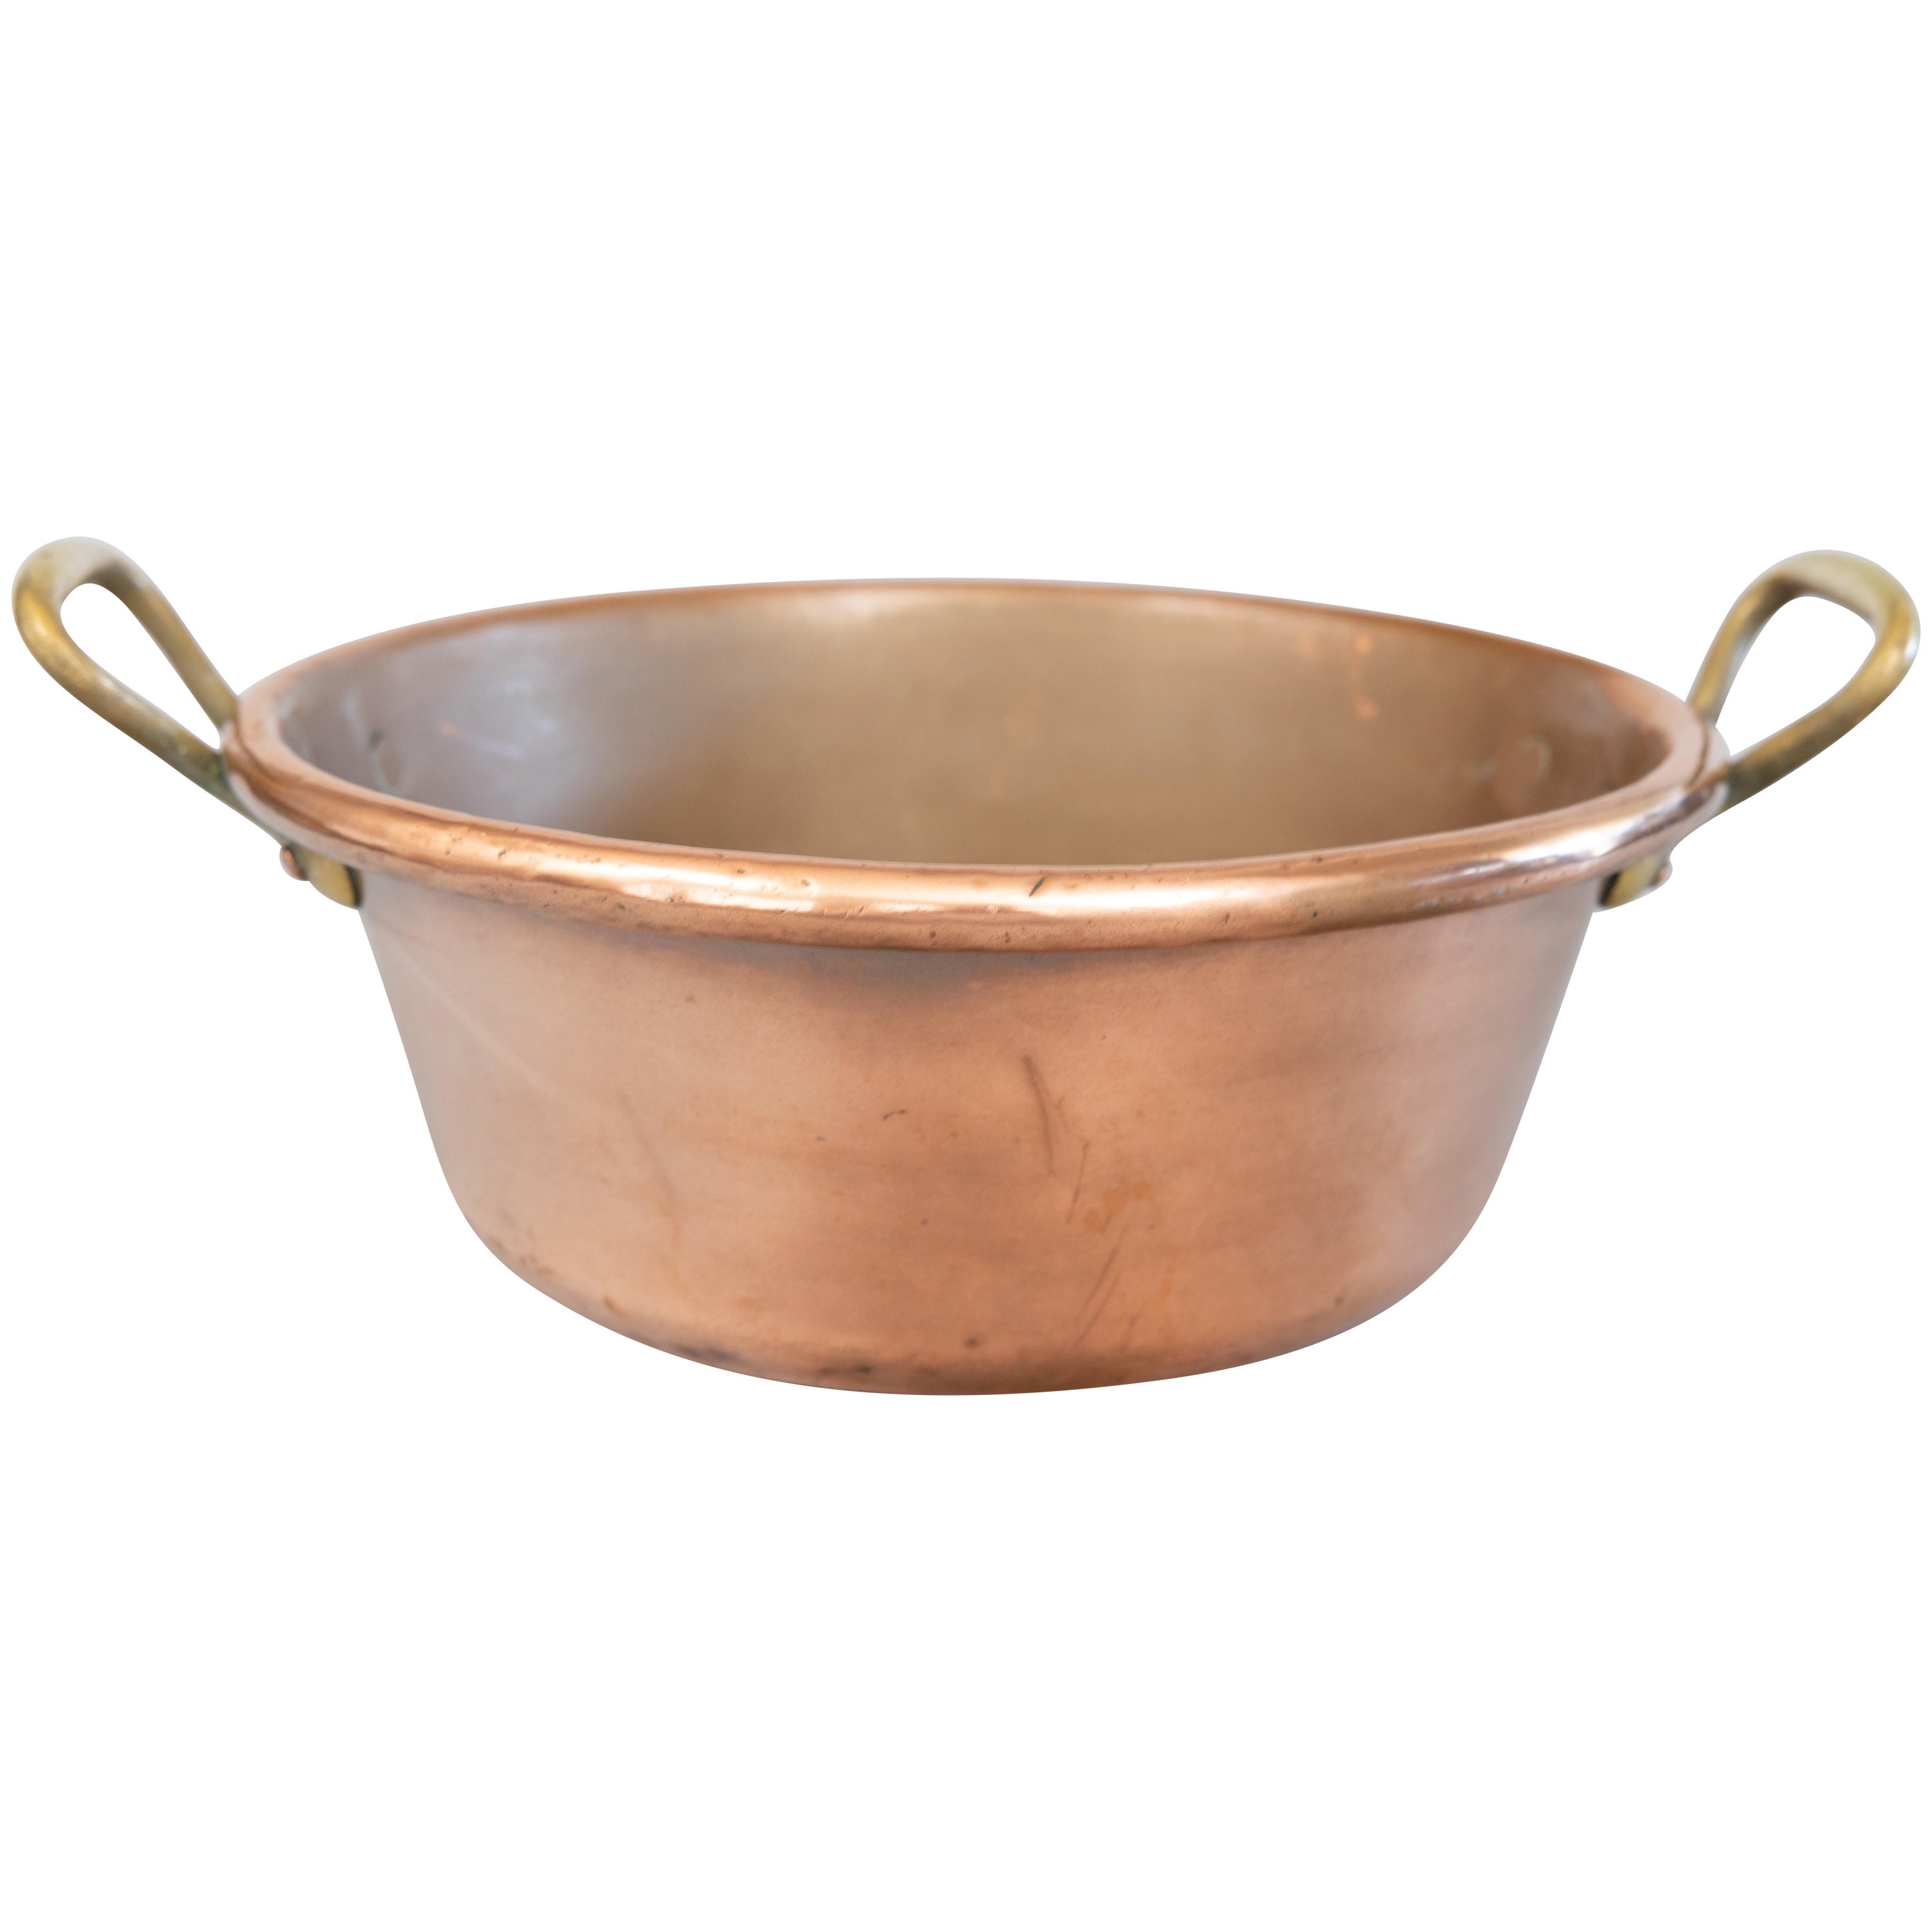 Traditional Farmhouse KitchenwareCookware Vintage Copper Cauldron With Iron Handles Rustic Cooking Pot Copper Pan French Jam Basin